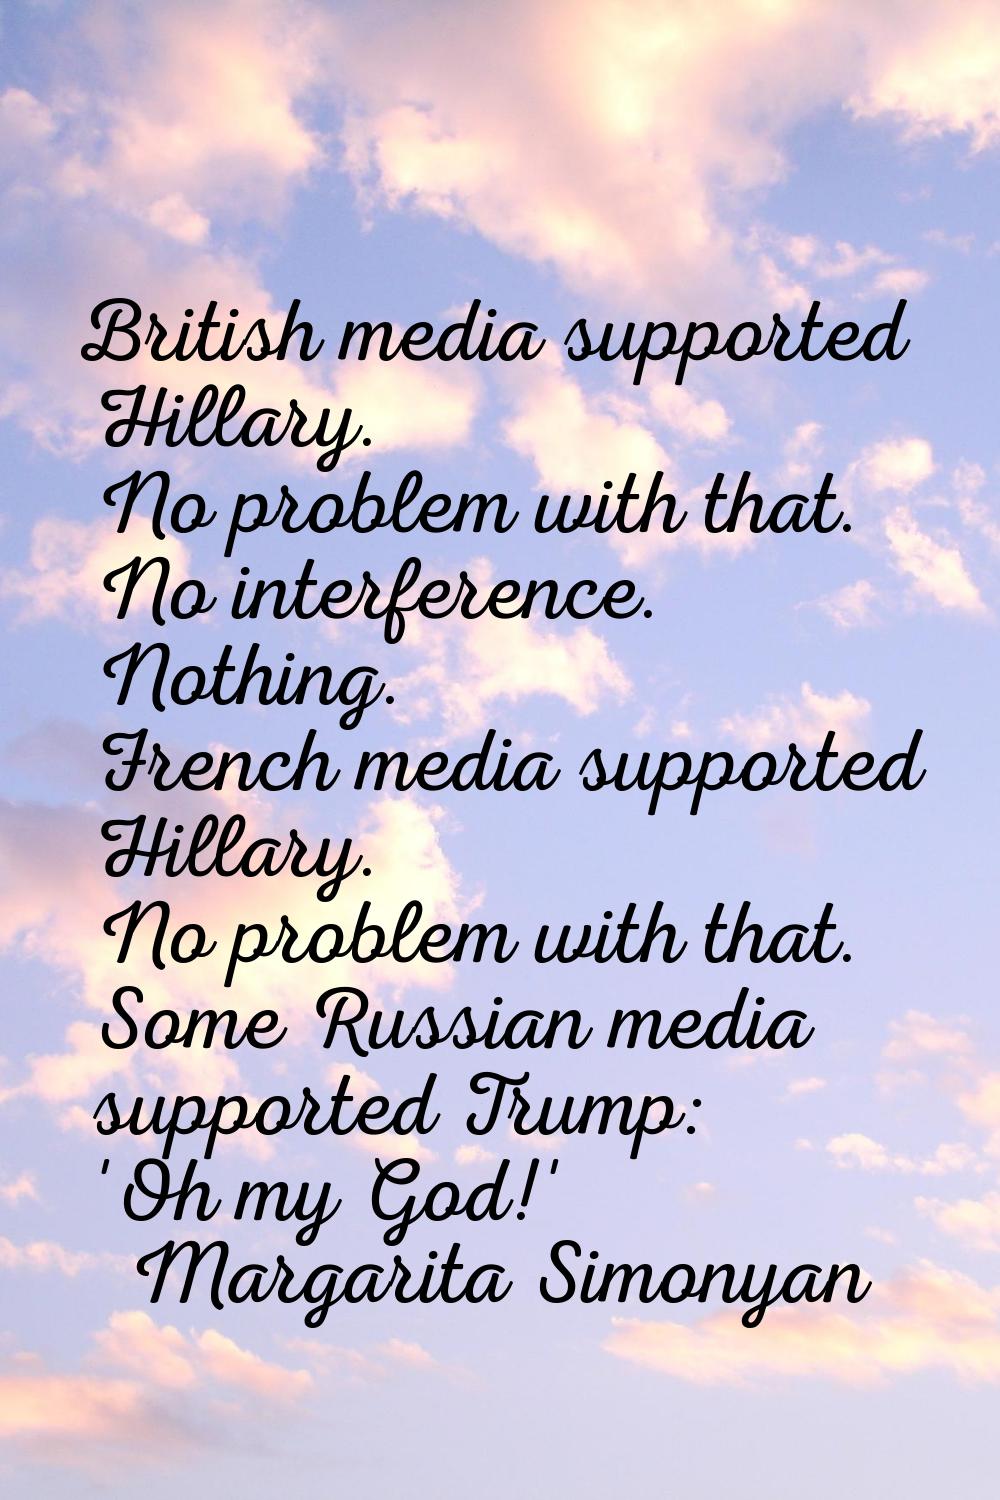 British media supported Hillary. No problem with that. No interference. Nothing. French media suppo